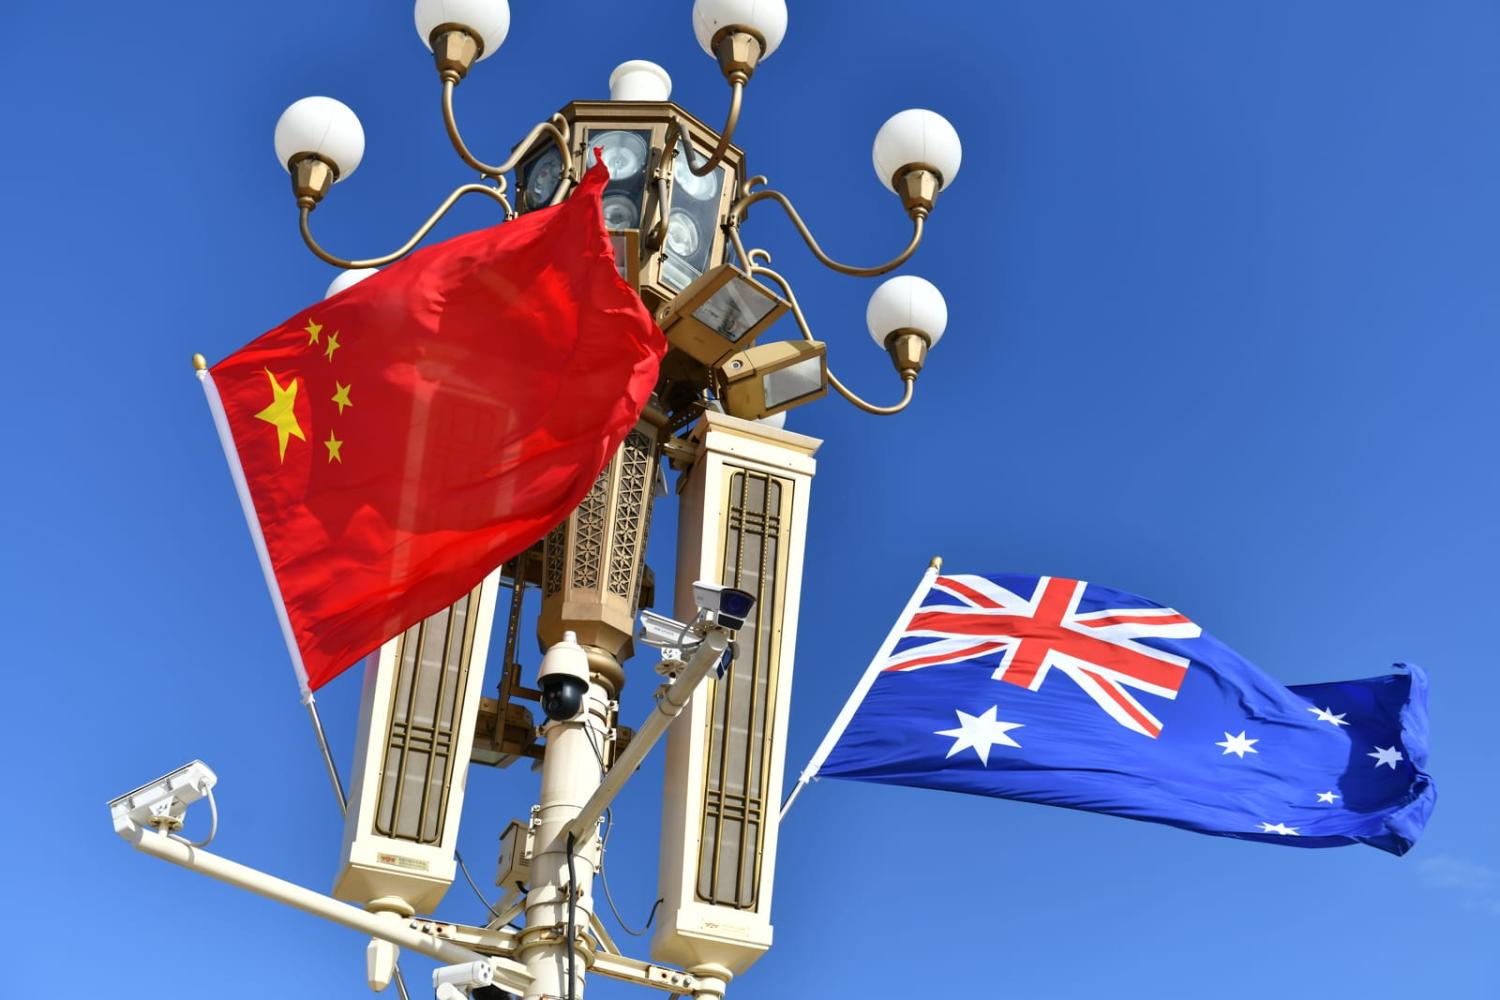 It’s clear that differences well understood on both sides, nonetheless, China and Australia are now focused on emphasising their many common interests (Chen Boyuan/VCG via Getty Images)